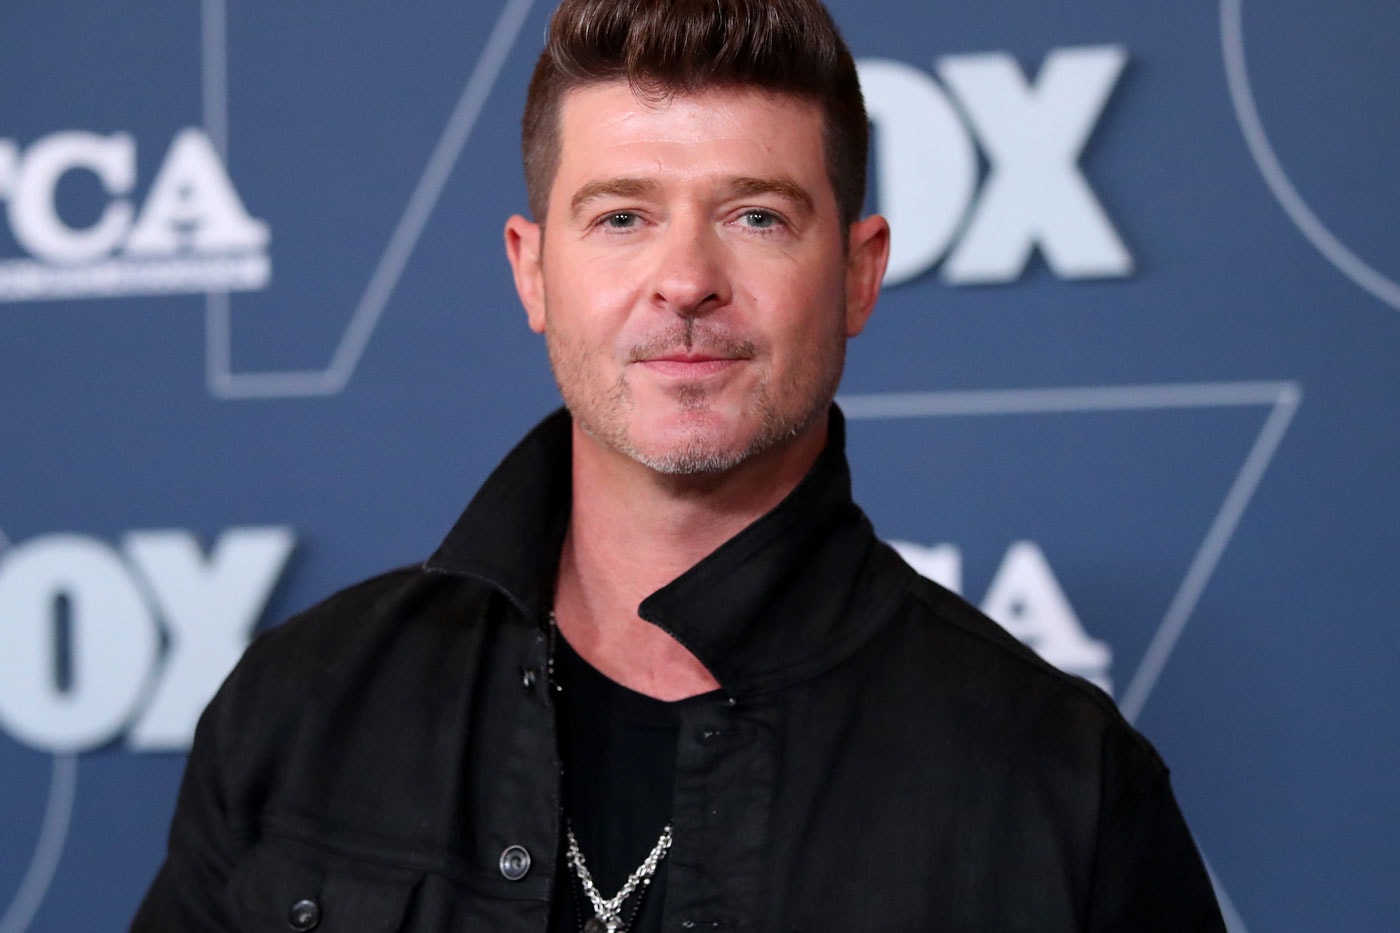 Robin Thicke Admits Alcohol and Drug Dependence in "Blurred Lines" Deposition Video